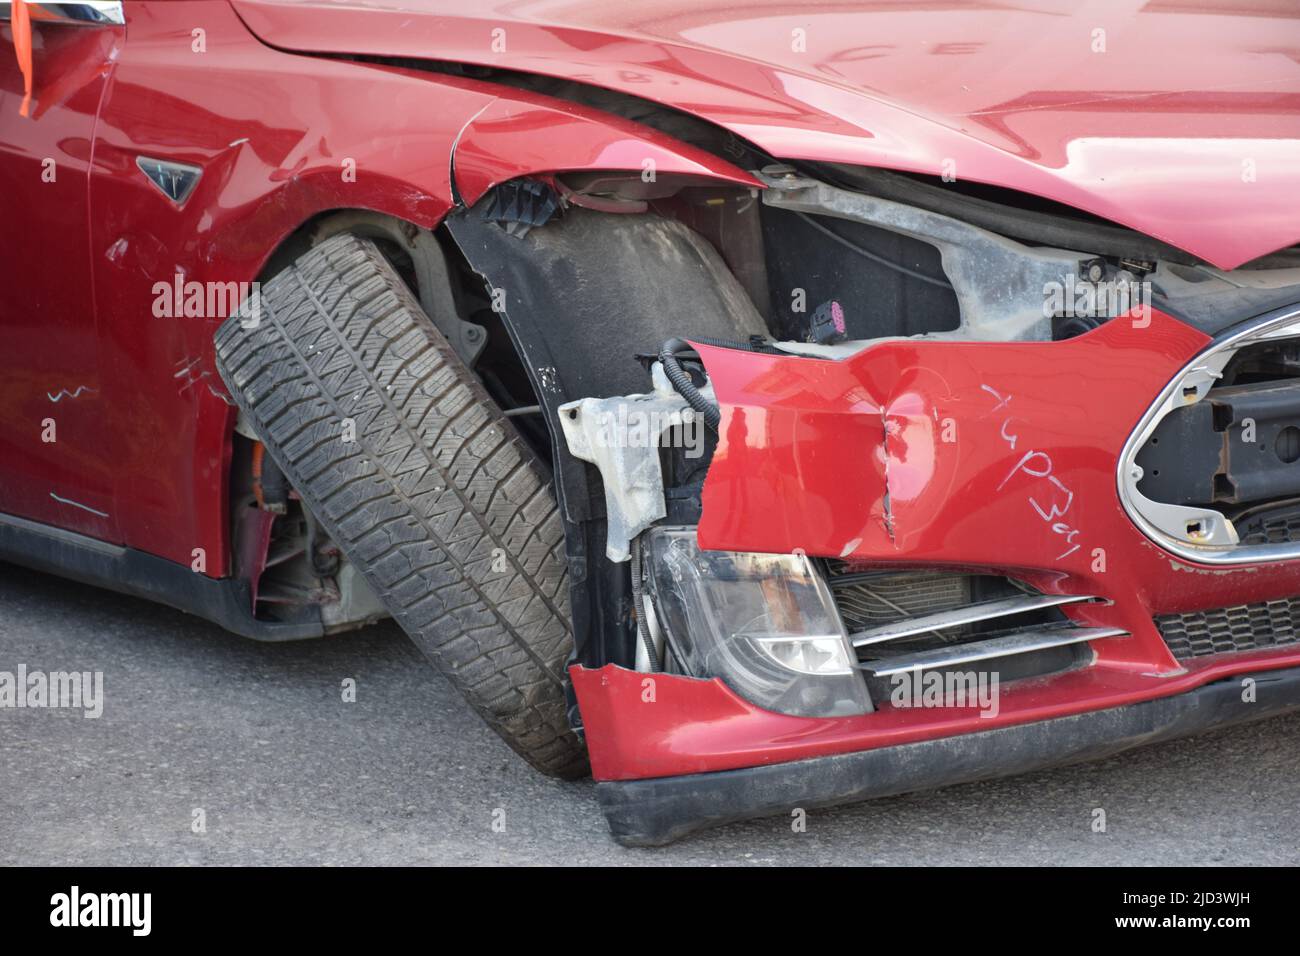 Crashed red electric car Stock Photo